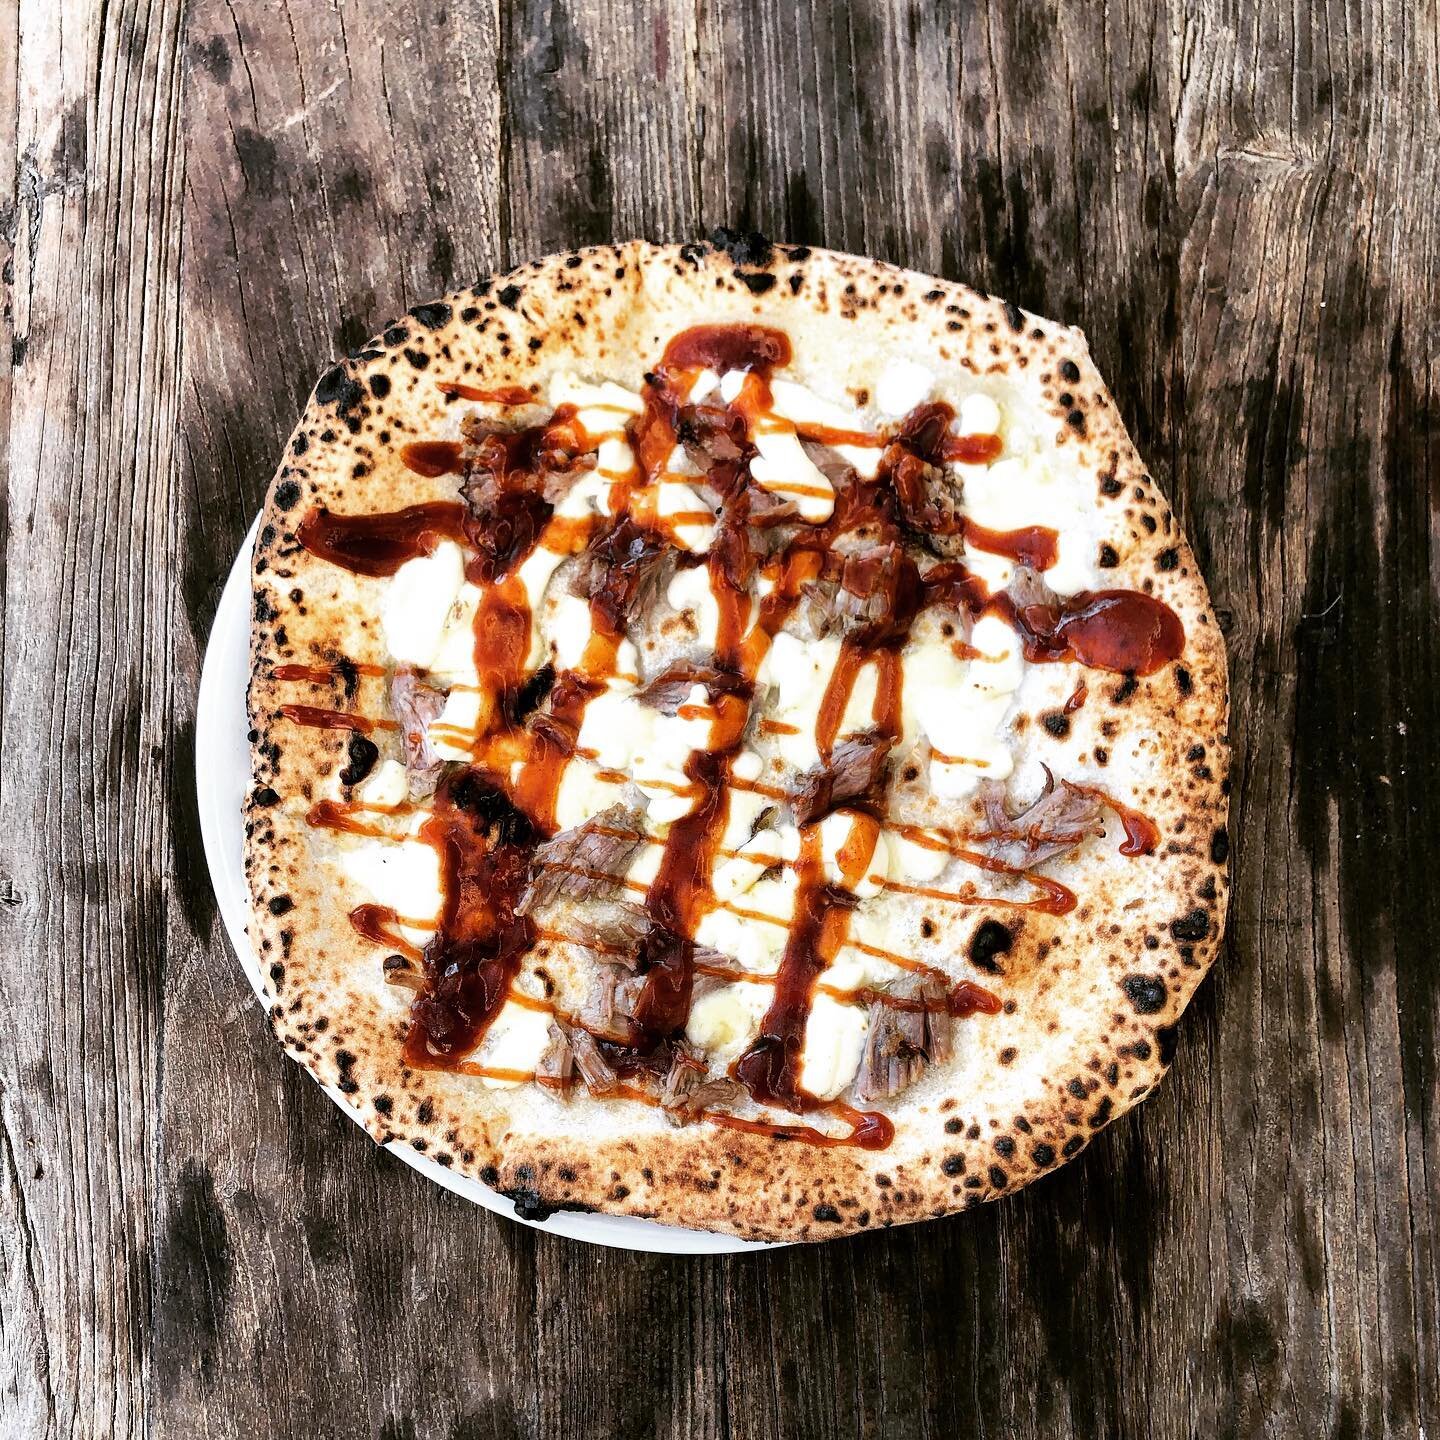 New special is here and this one is something we have never done before!! ⁣
⁣
BBQ Pulled Pork Pizza!! ⁣
⁣
Sous vide smoked Pulled Pork, BBQ Sauce drizzle, Fontina, Mozzarella, &amp; Olio⁣
⁣
It&rsquo;s seriously delicious